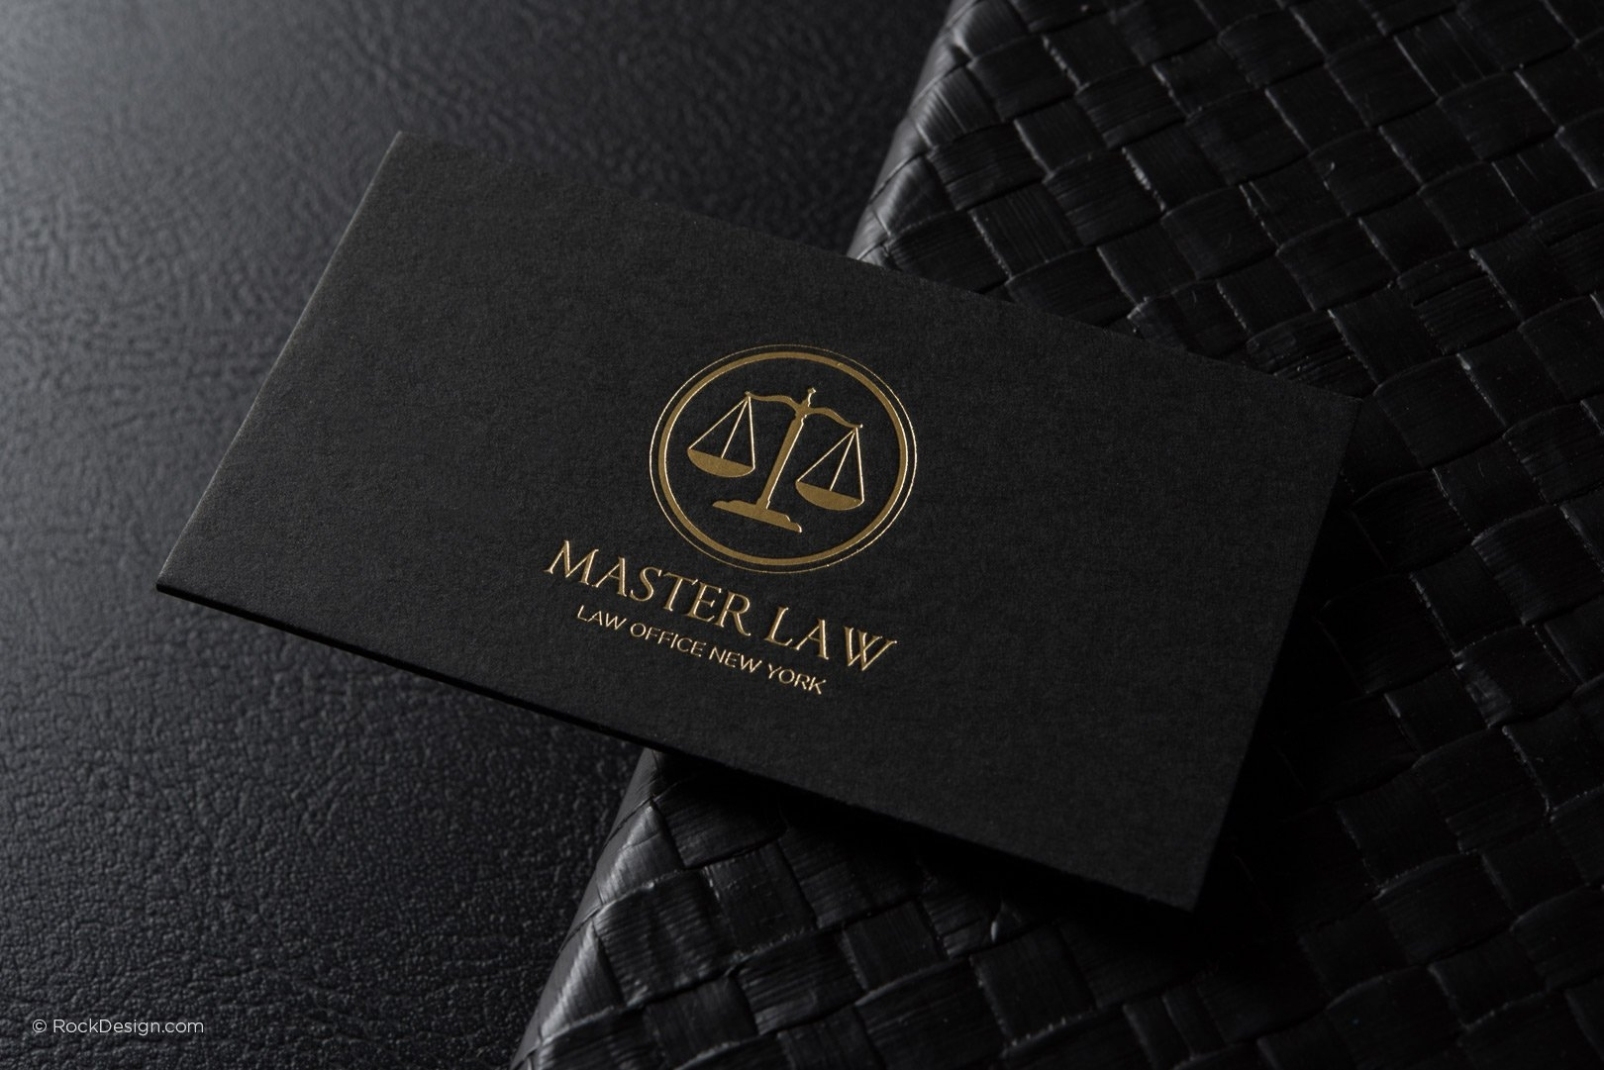 Free Lawyer Business Card Template | Rockdesign Inside Legal Business Cards Templates Free